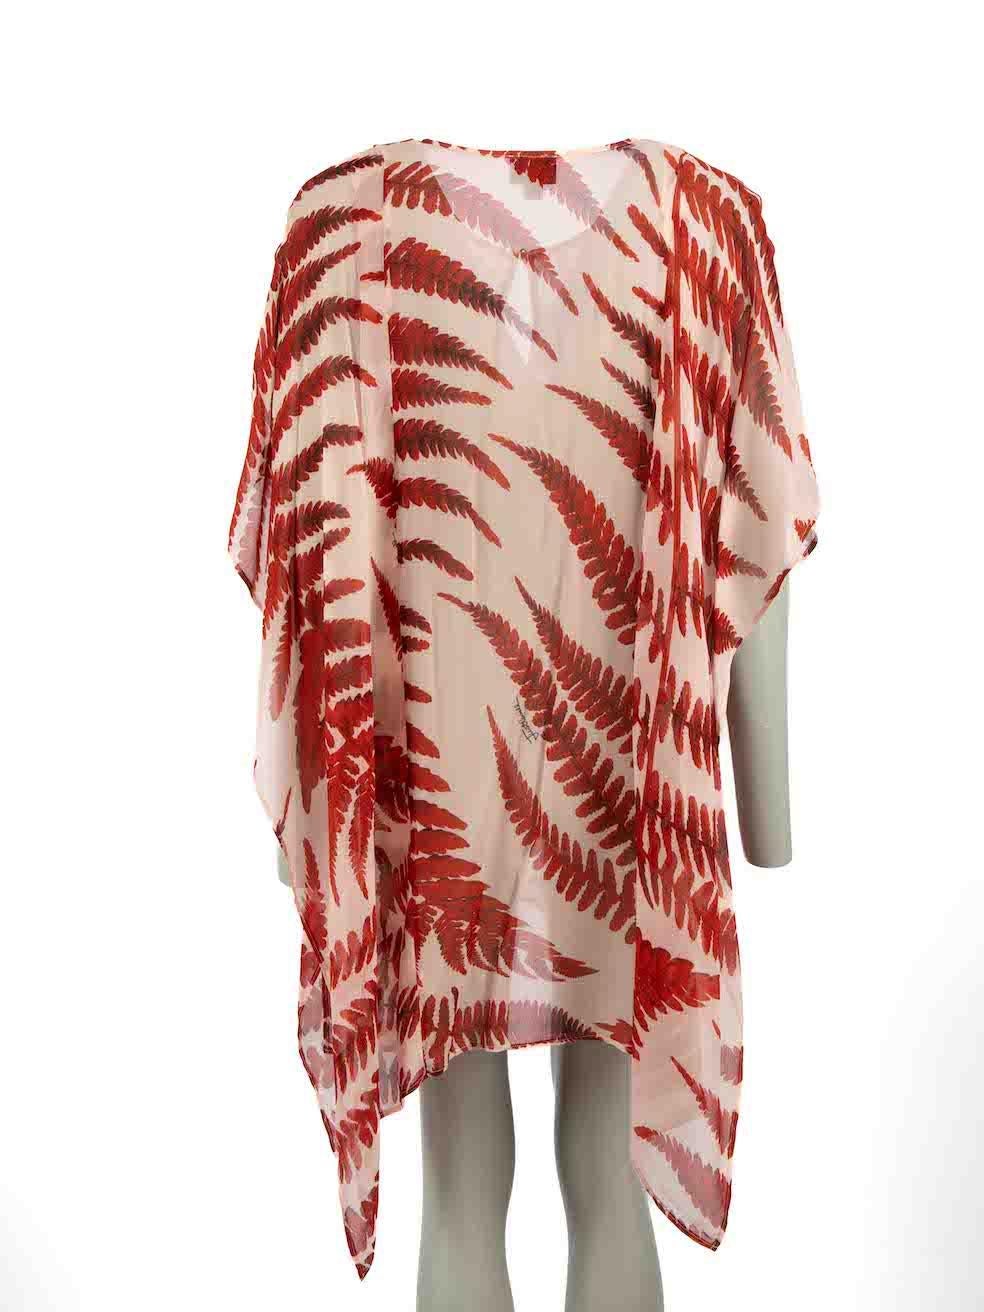 Roberto Cavalli Just Cavalli Pink Fern Print Sheer Kaftan Dress Size S In Excellent Condition For Sale In London, GB